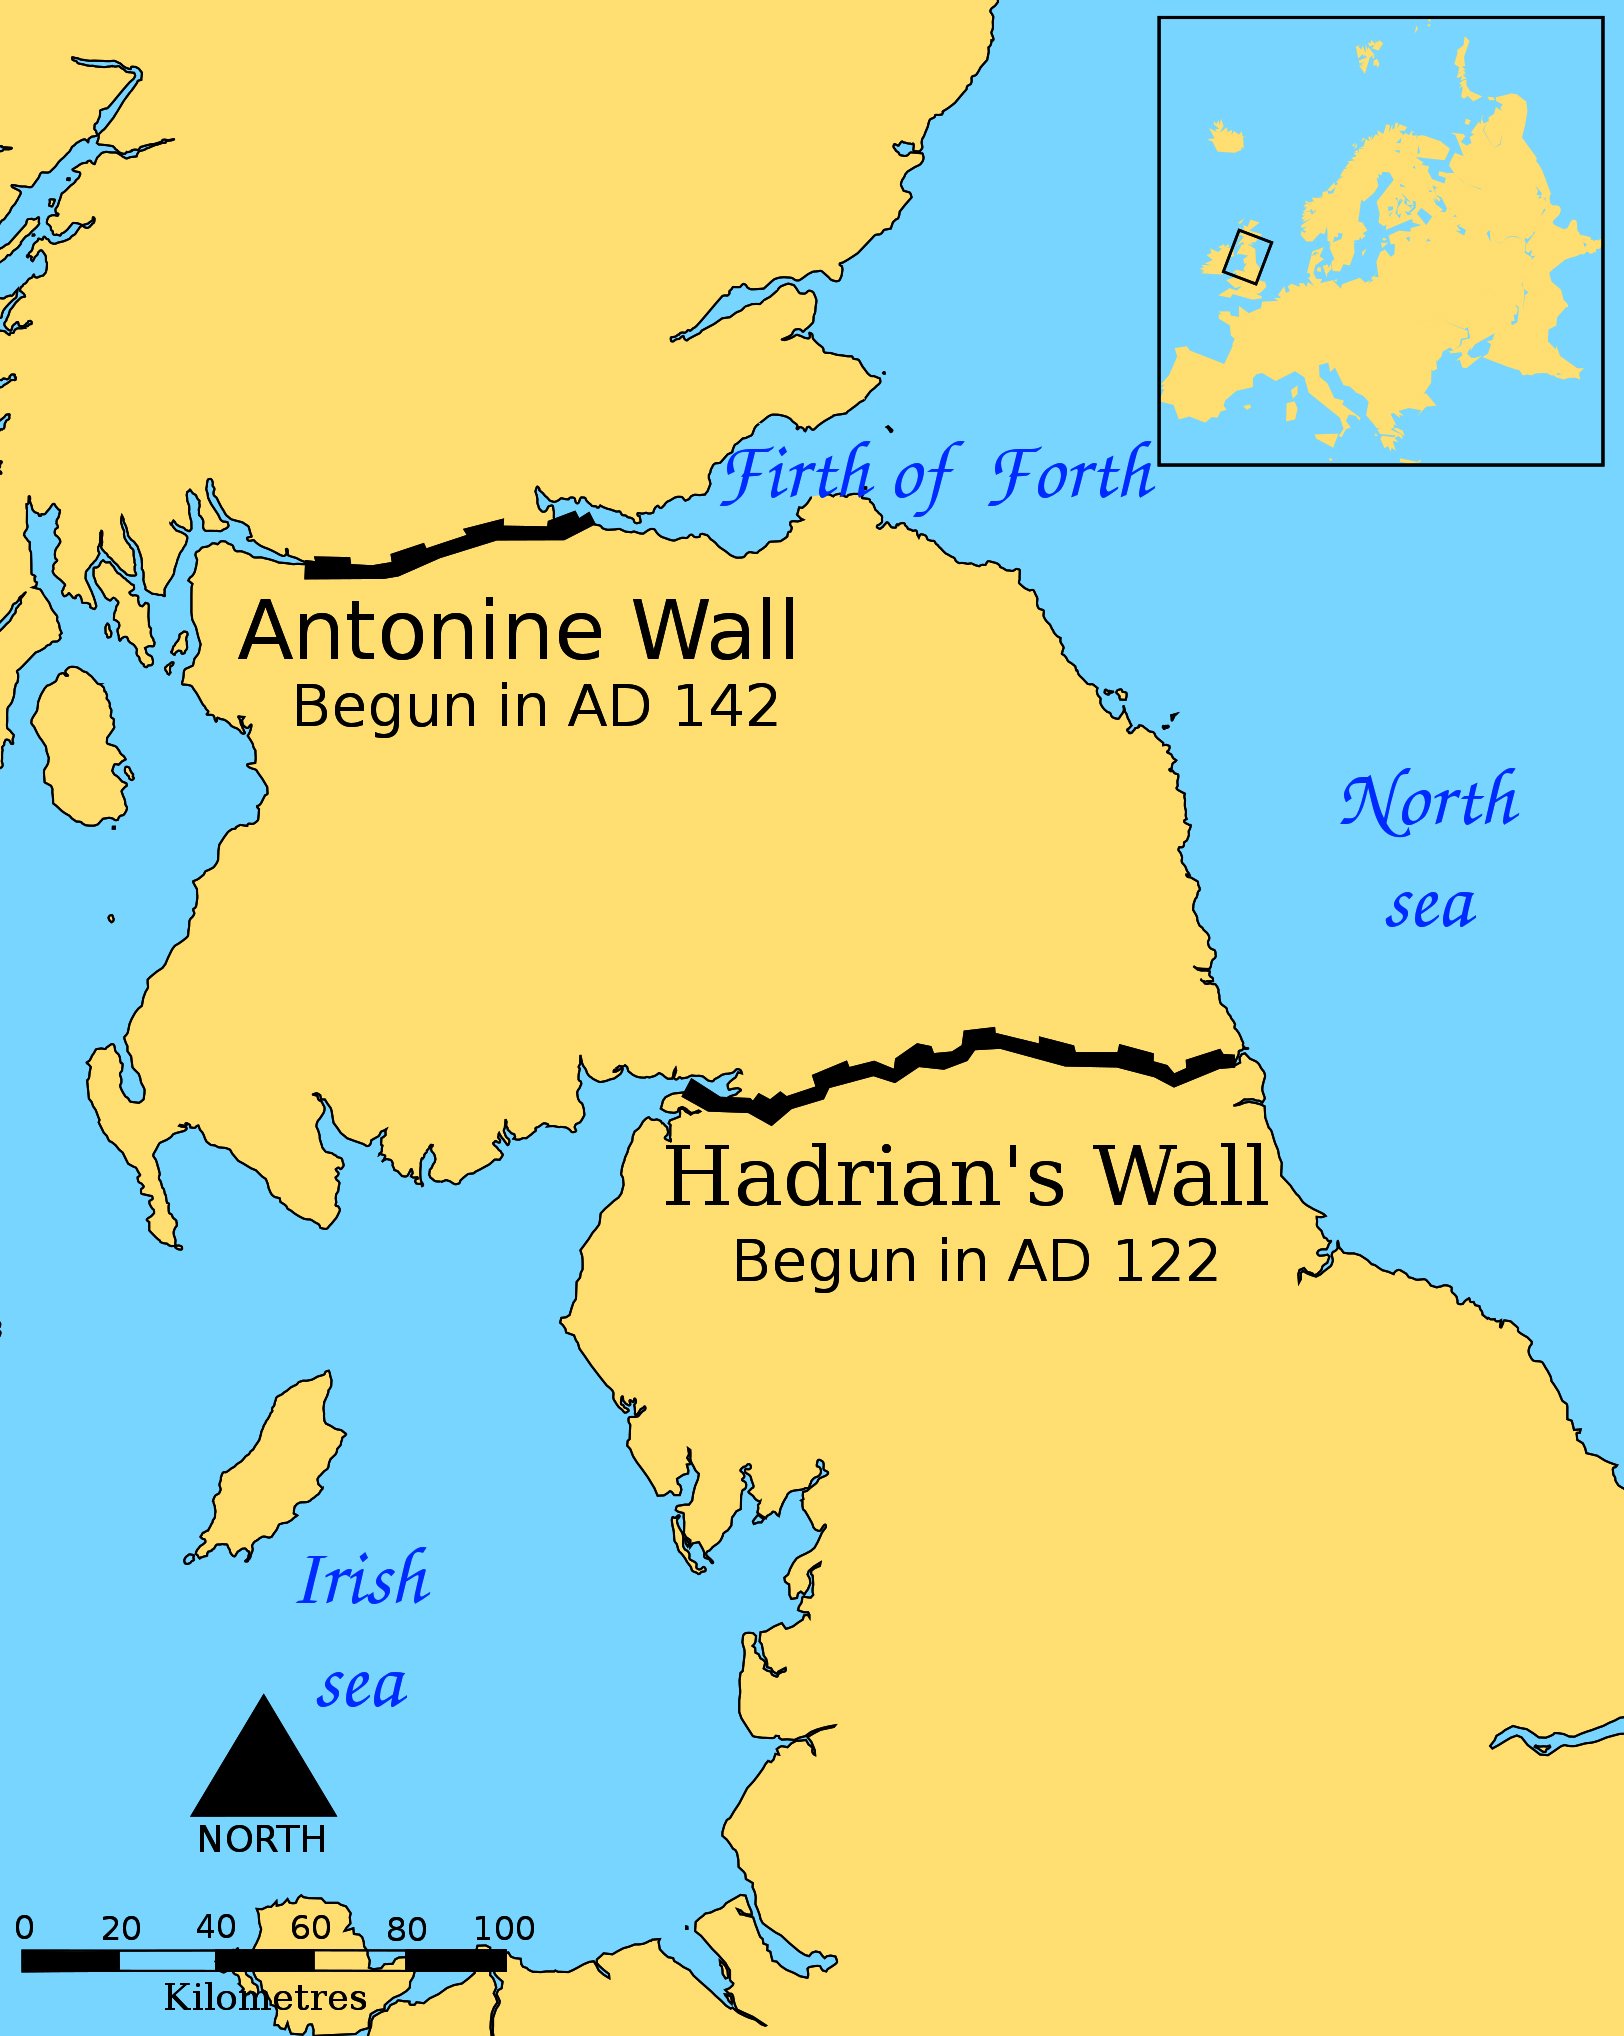 A map of the United Kingdom showing the locations of two ancient Roman walls, the Antonine Wall in Scotland and Hadrian’s Wall in England, both marked with black lines. The map has a blue and yellow color scheme, a scale, a compass rose, and an inset showing the location of the islands in Europe.